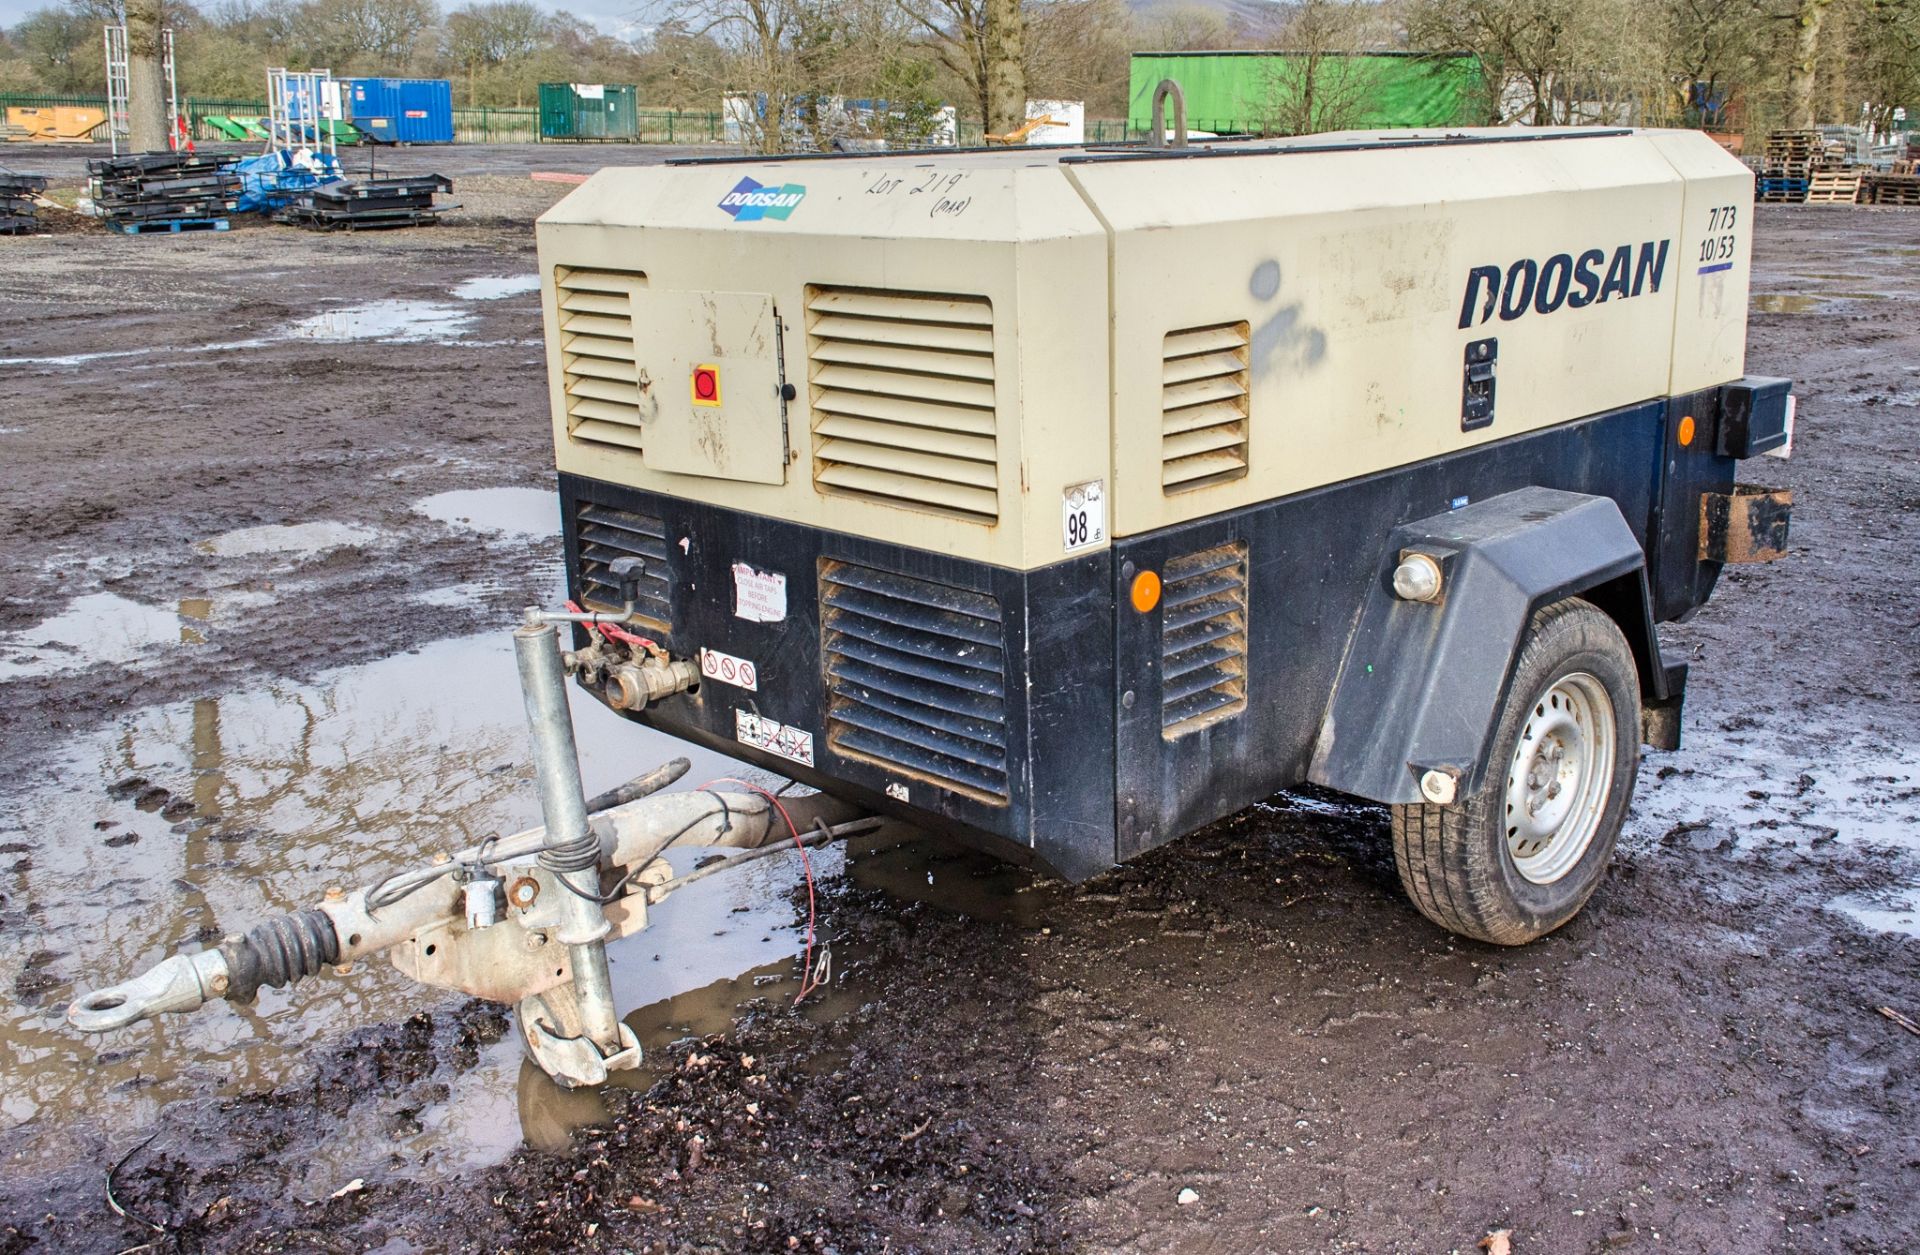 Doosan 7/73 diesel driven fast tow mobile air compressor Year: 2015 S/N: FY543557 Recorded Hours: